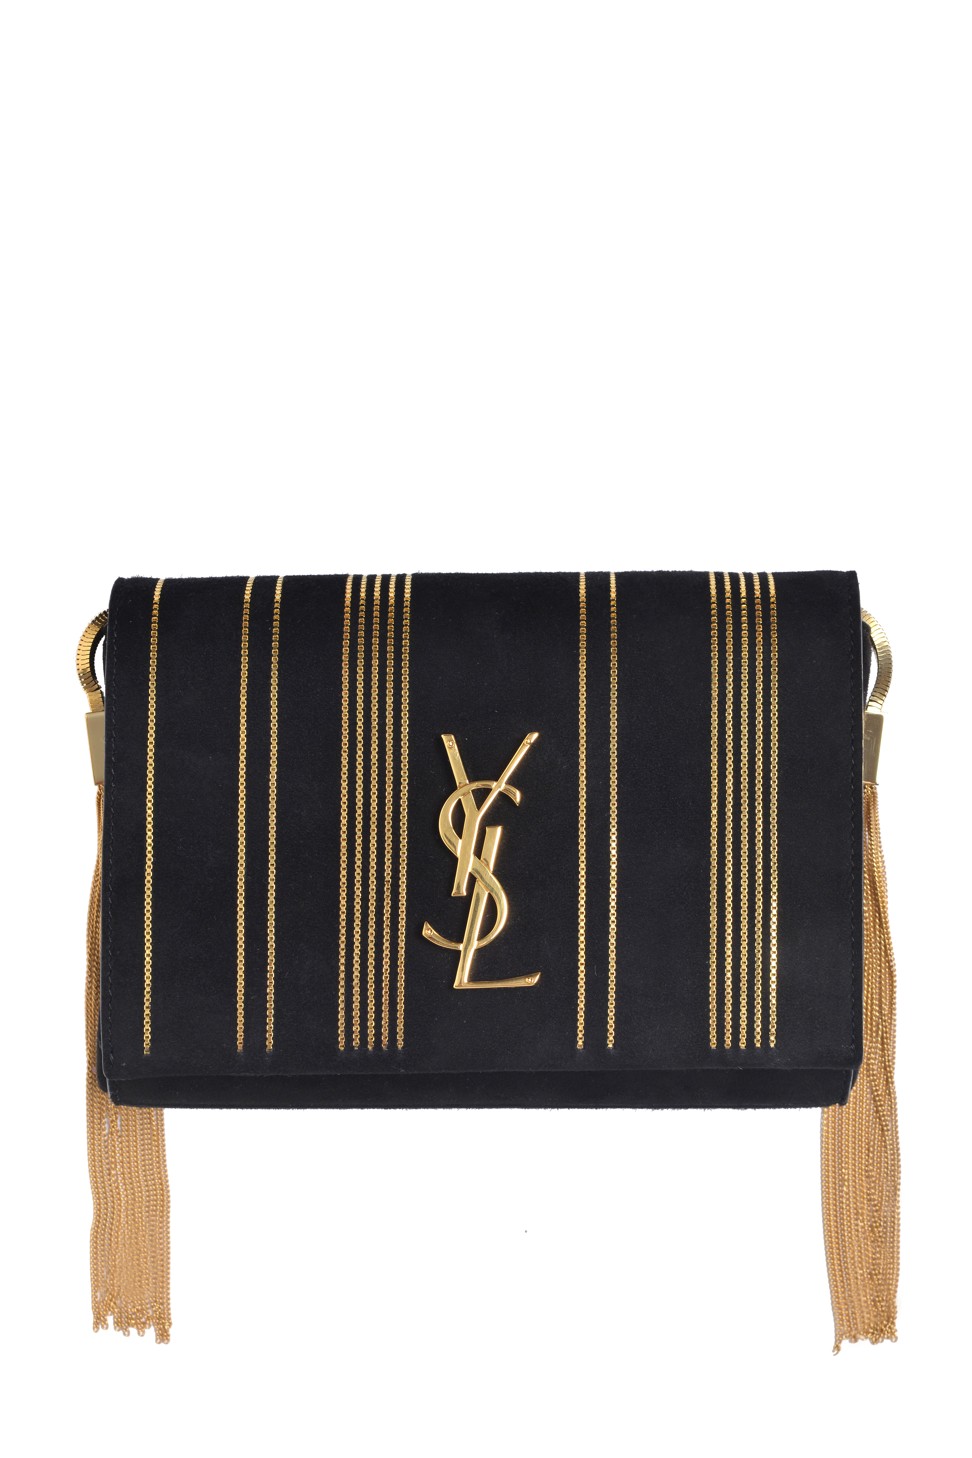 The Saint Laurent Kate chain bag in black suede and gold tassels costs US$2,875.